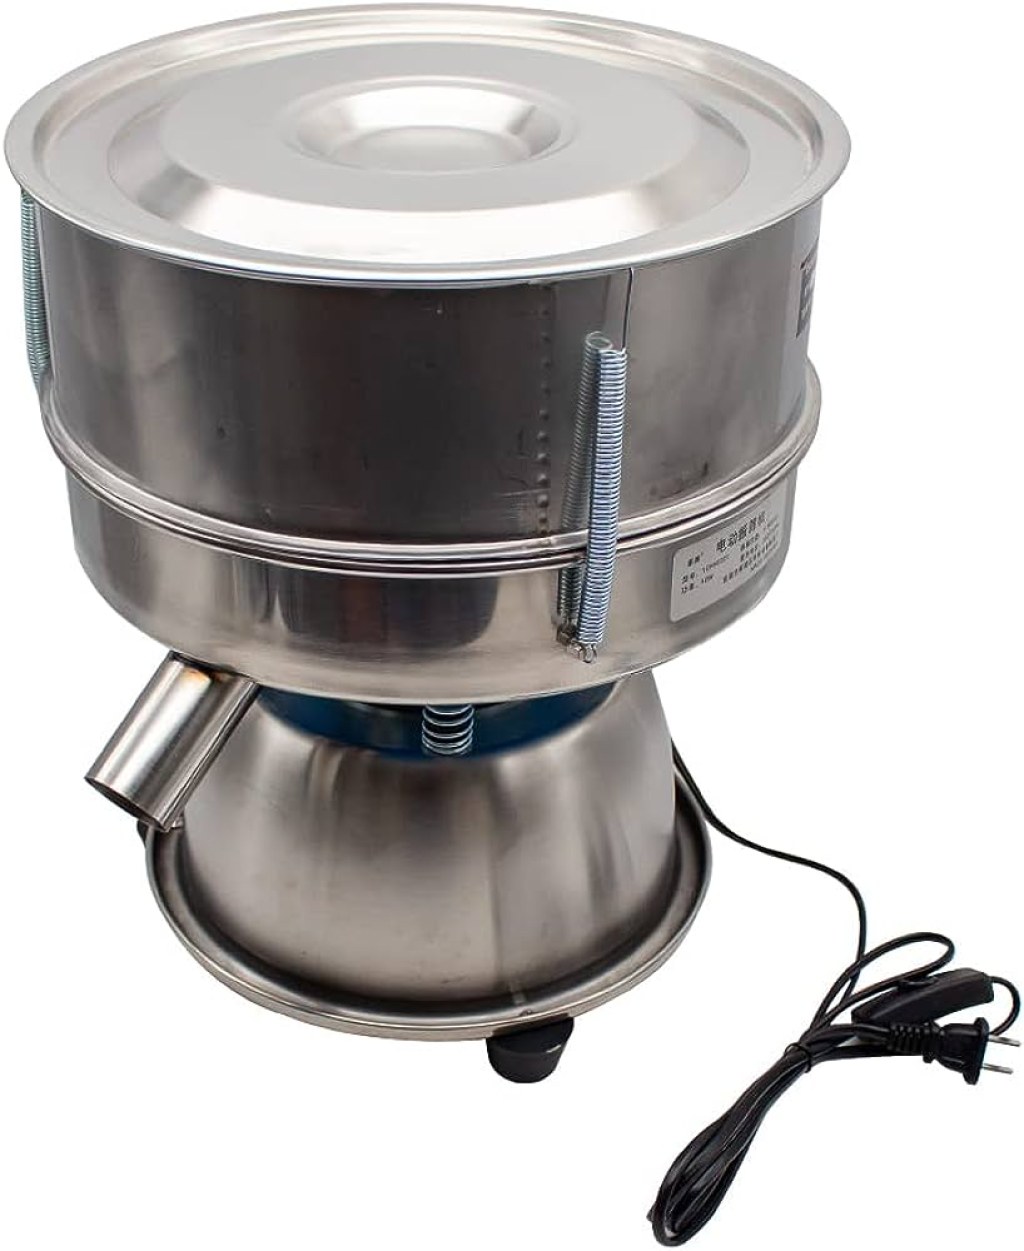 Picture of: Toplionace  V  W Stainless Steel Automatic Sieve Shaker